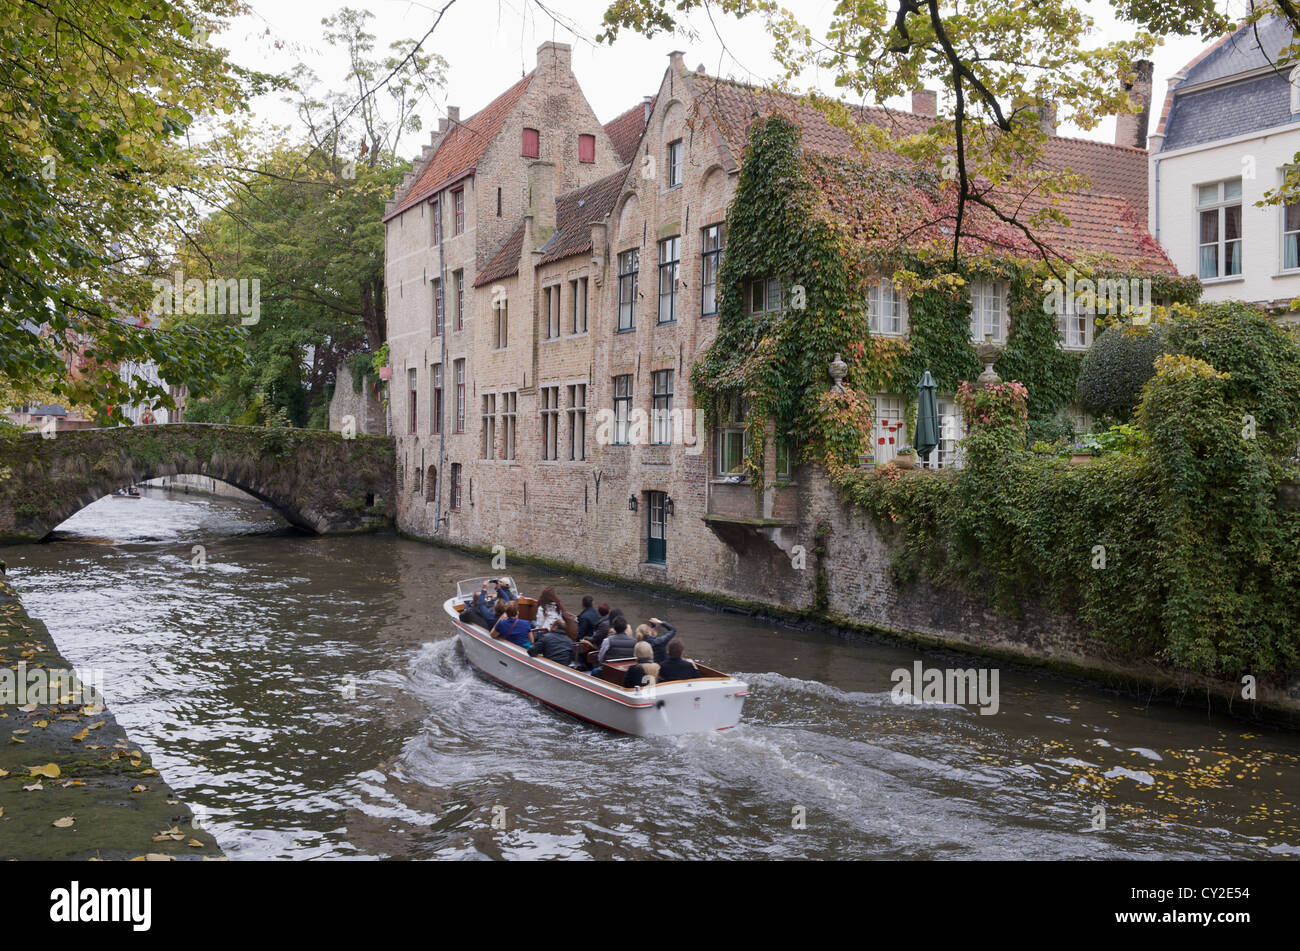 Tourists enjoying a boat trip on a beautiful canal in the Belgian city of Brugge Stock Photo